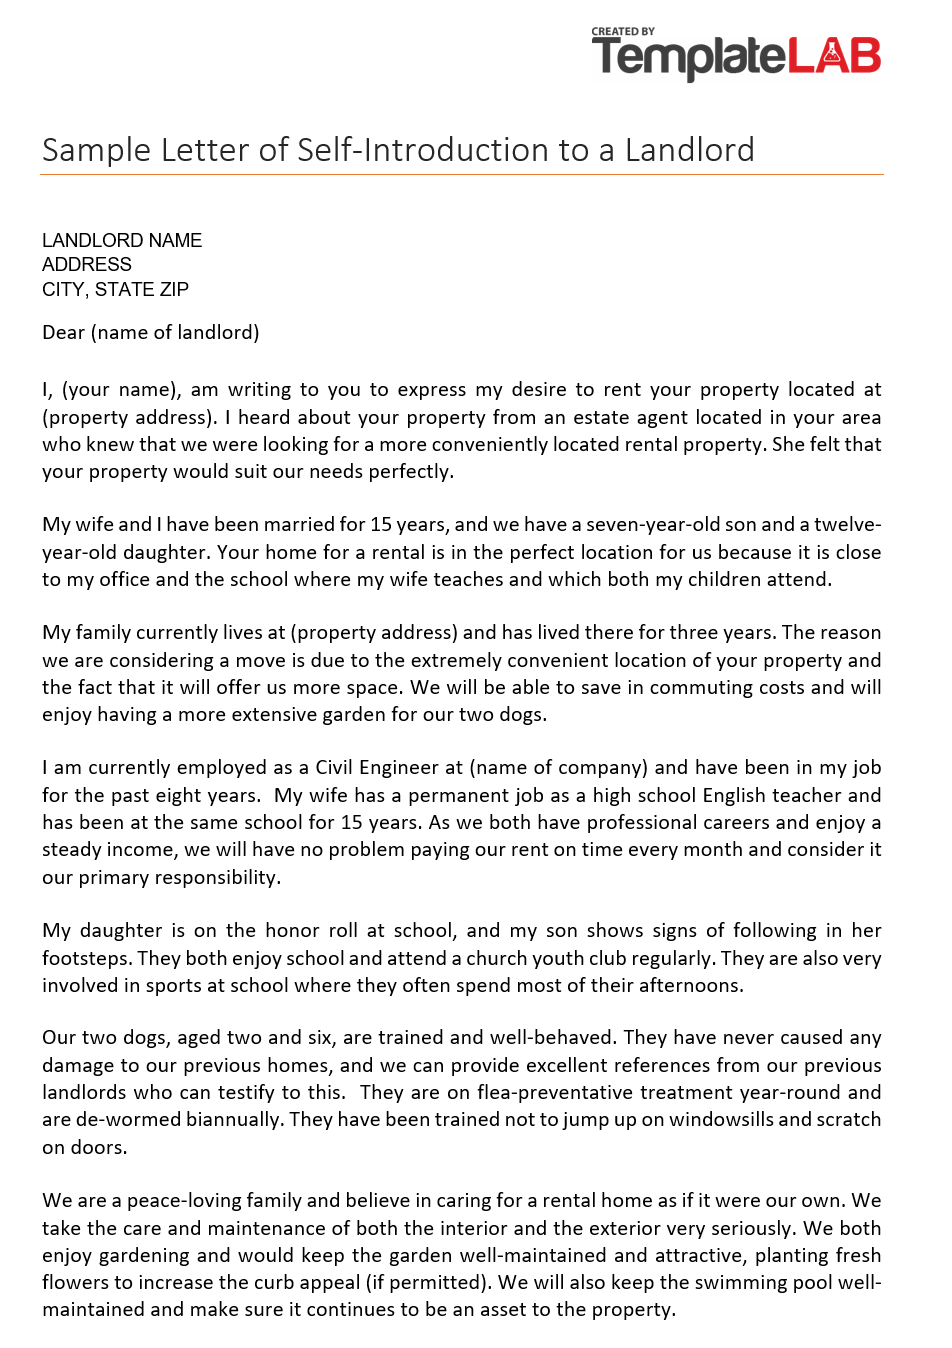 Sample Letter Of Introduction For Job from templatelab.com